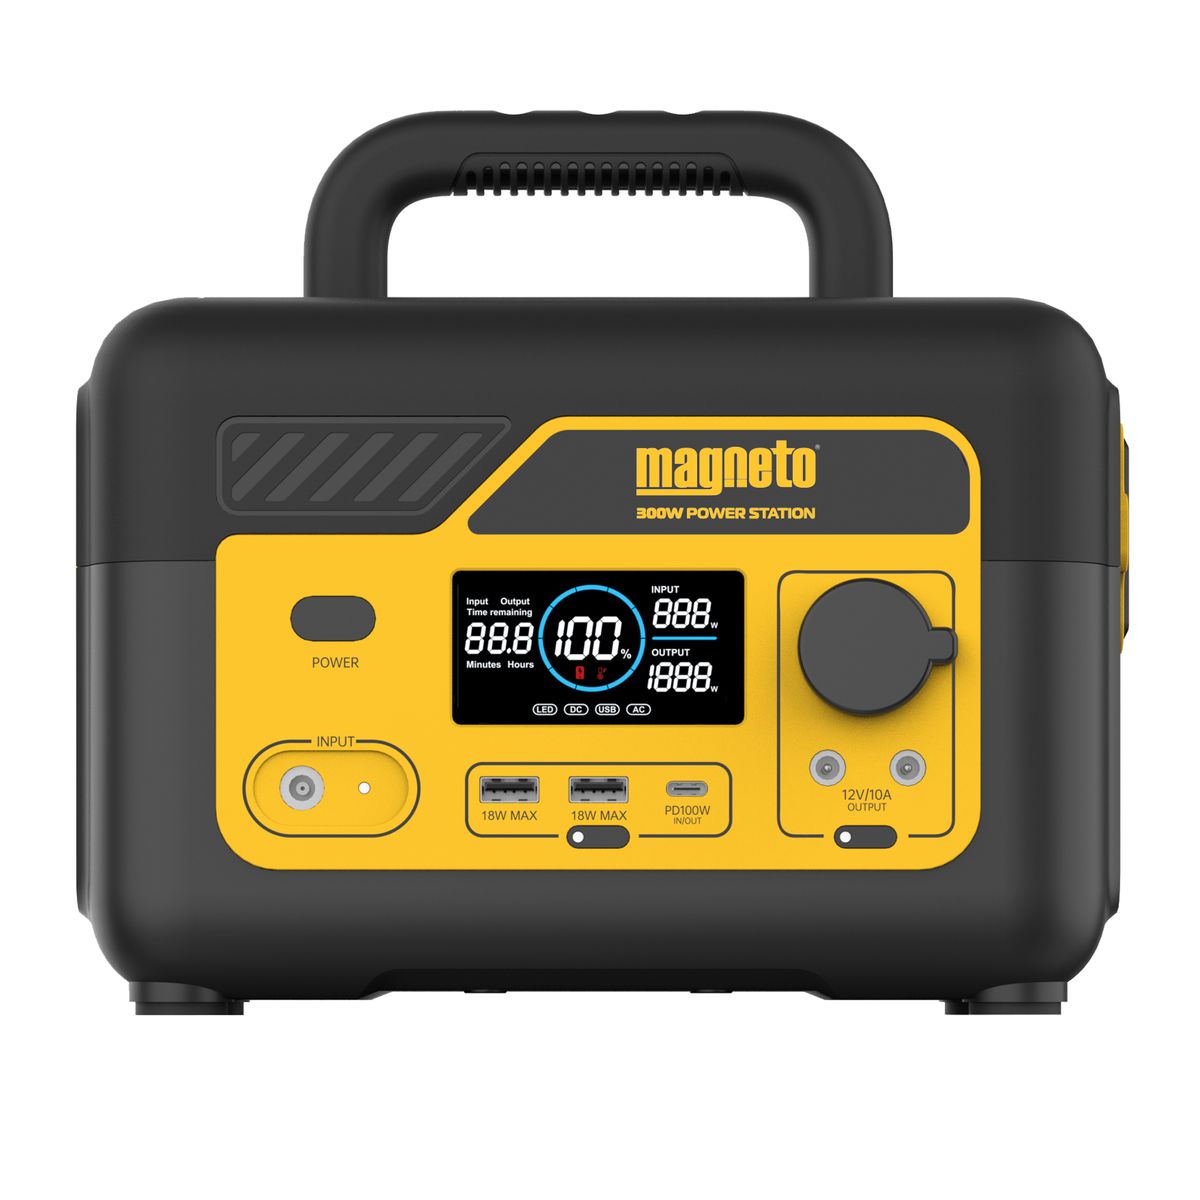 Magneto 300W (346Wh) Portable Power Backup Station with LCD Display